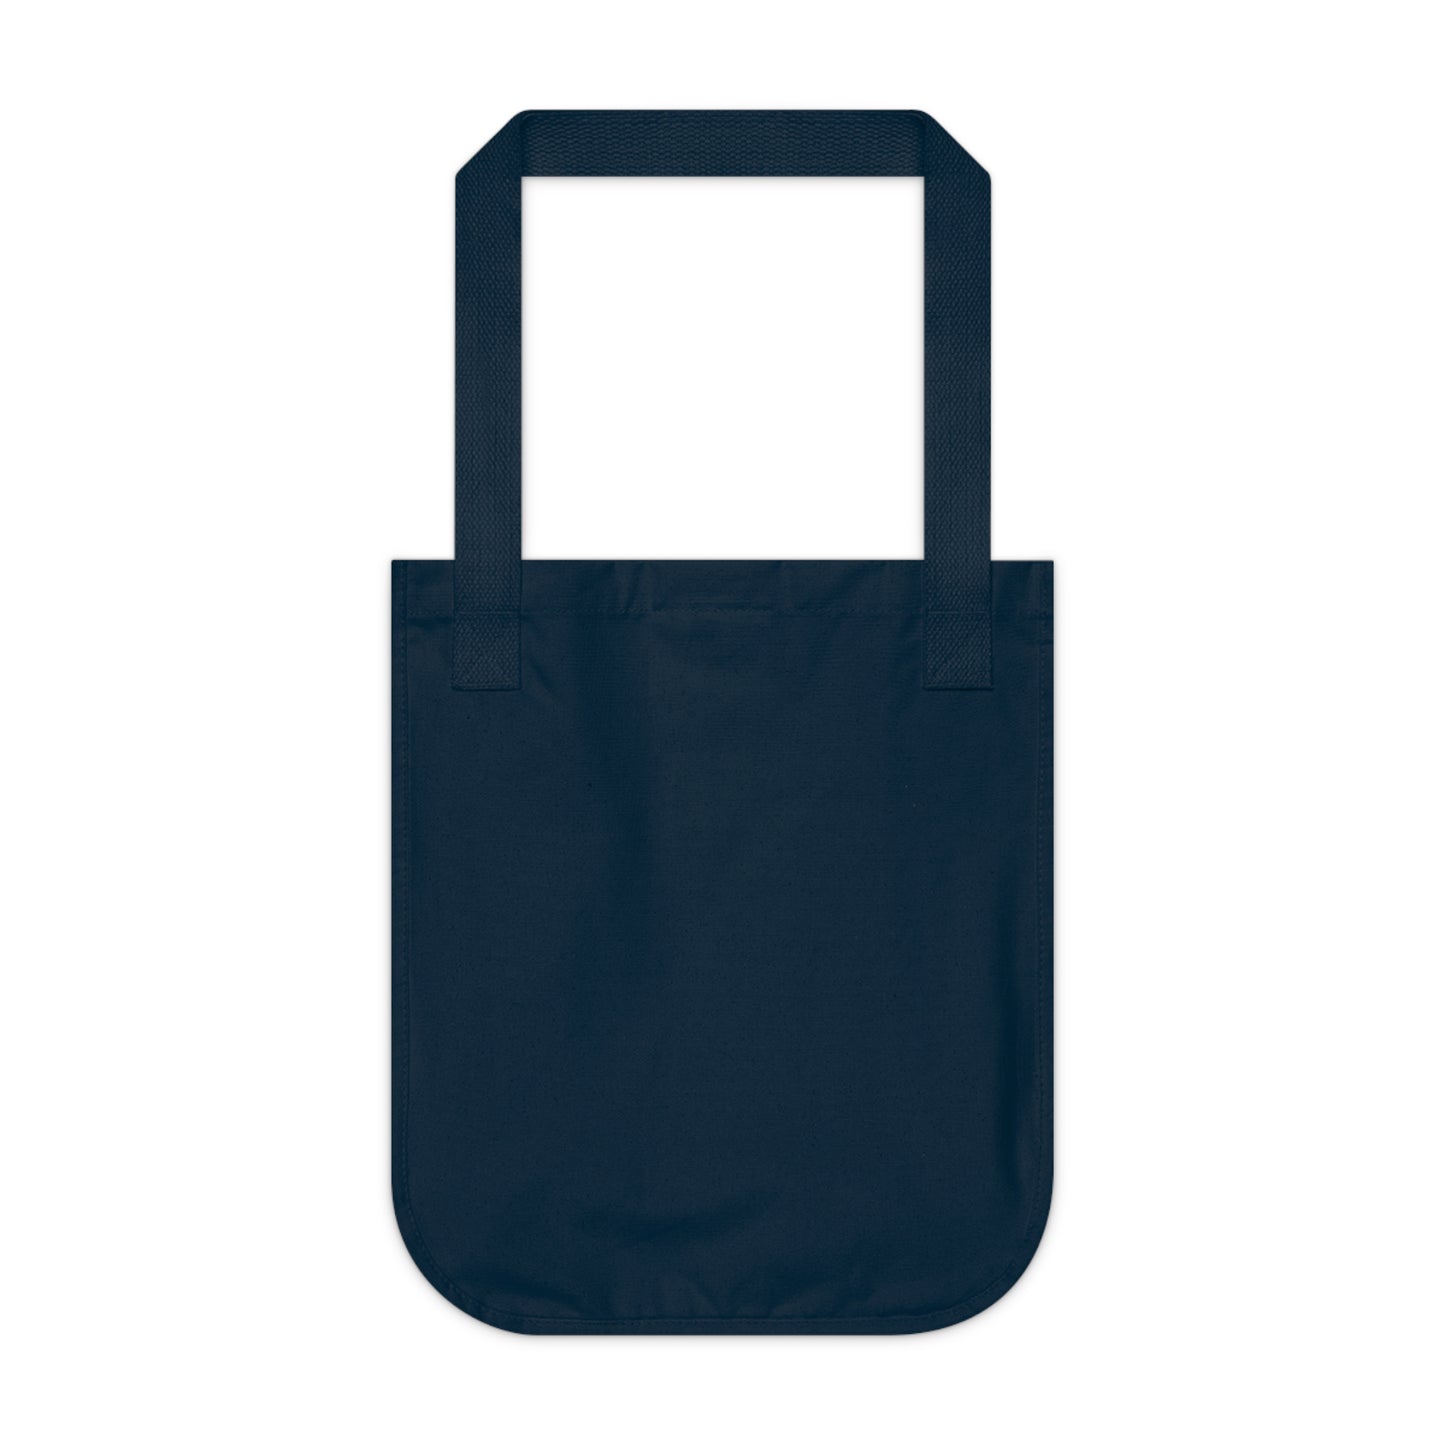 "Square Splendor: The Energy and Beauty of Nature" - Bam Boo! Lifestyle Eco-friendly Tote Bag